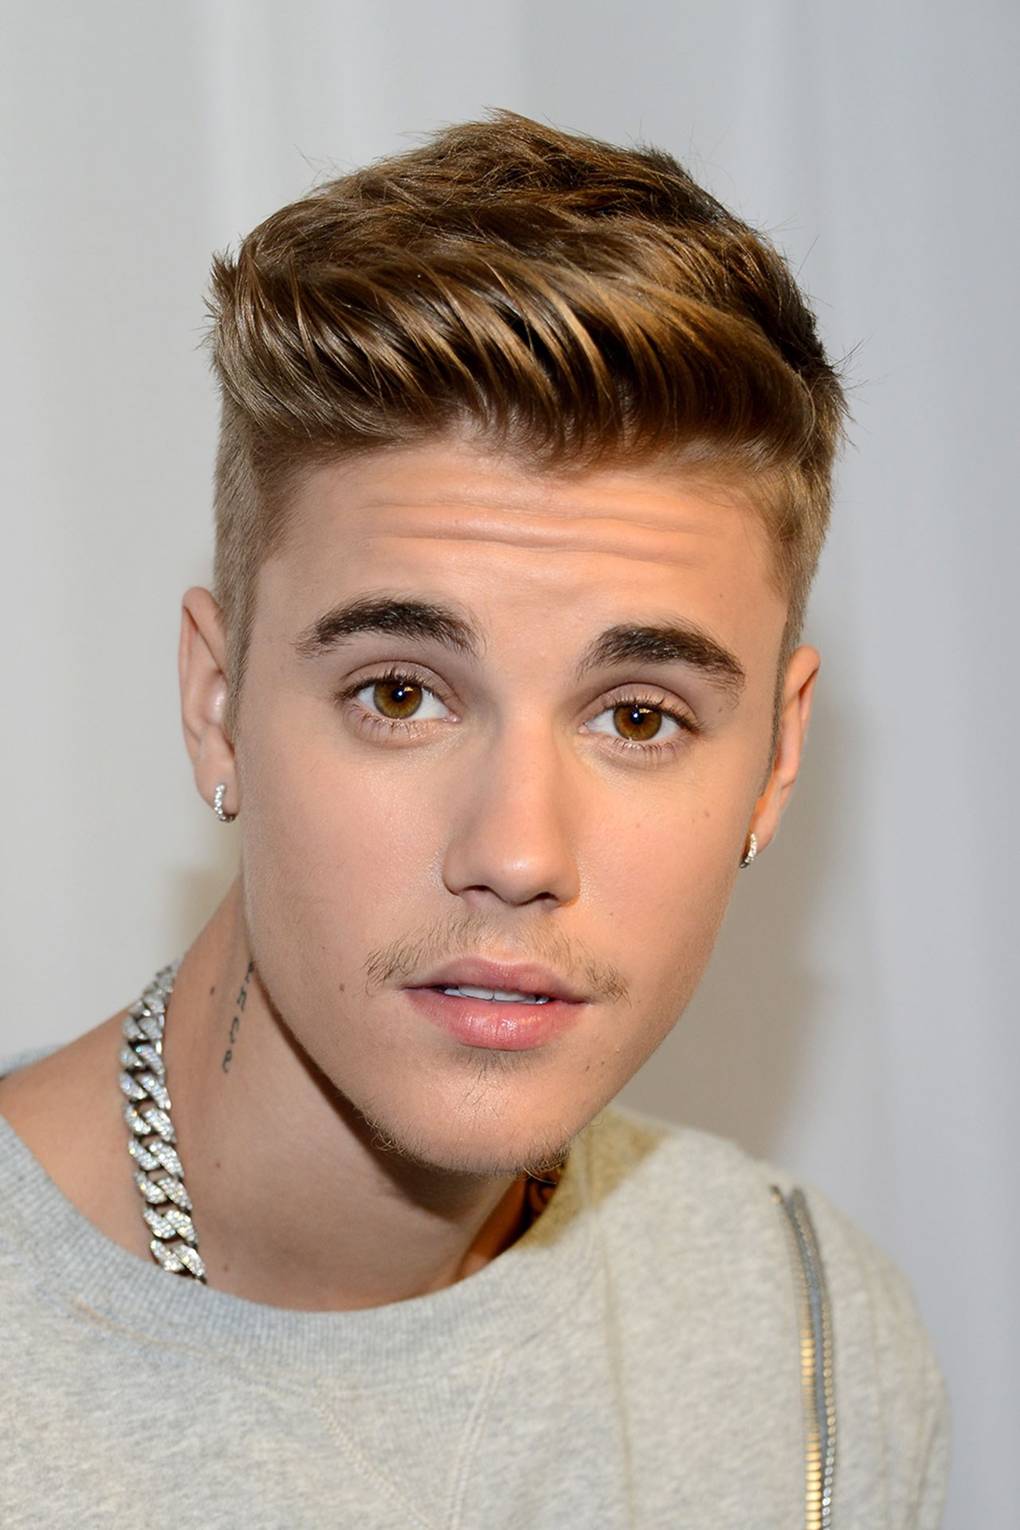 Justin Bieber's best hairstyles styles over the years